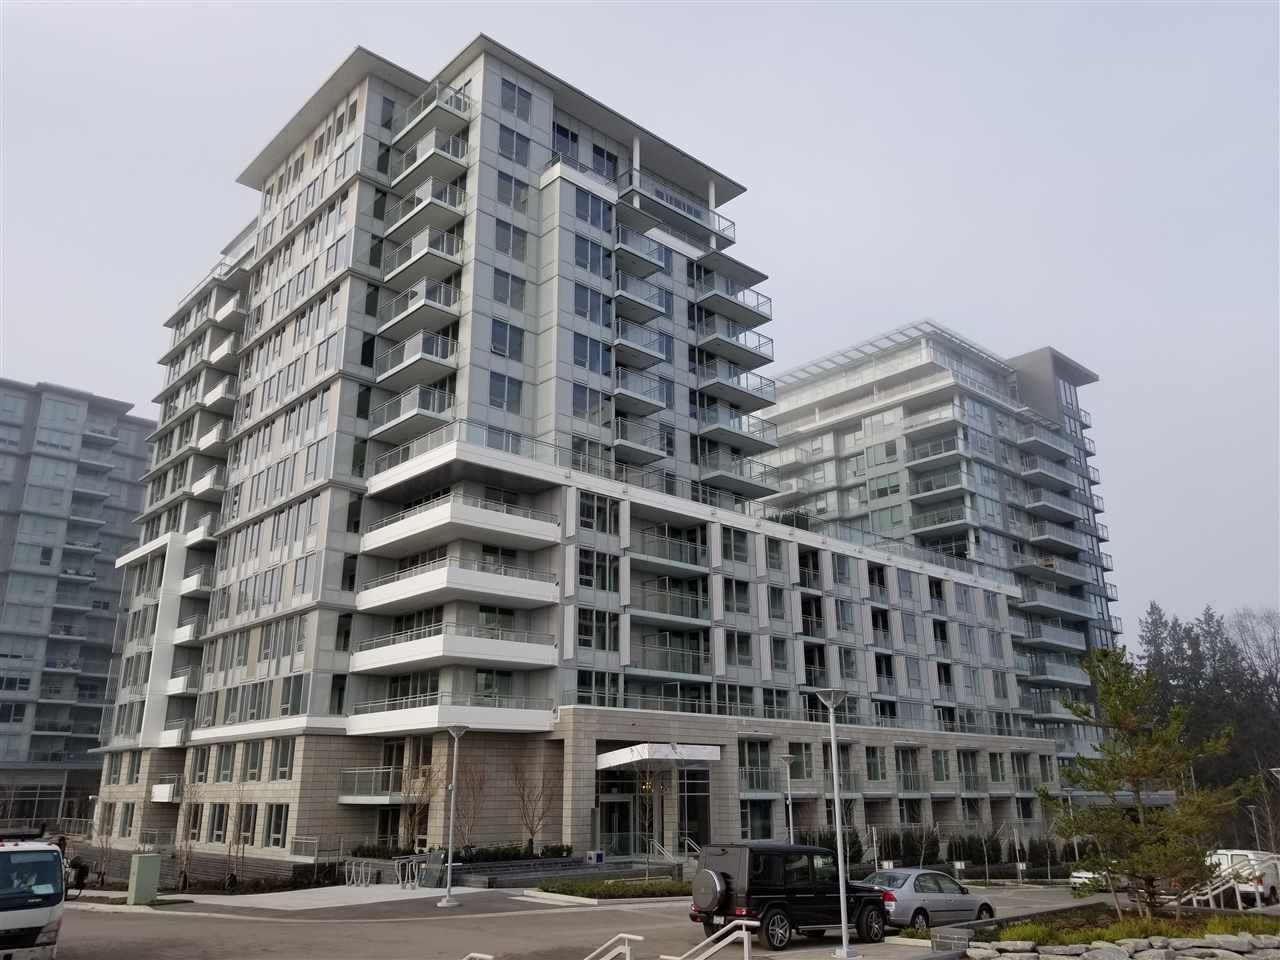 Main Photo: 1905 3233 KETCHESON Road in Richmond: West Cambie Condo for sale : MLS®# R2234173